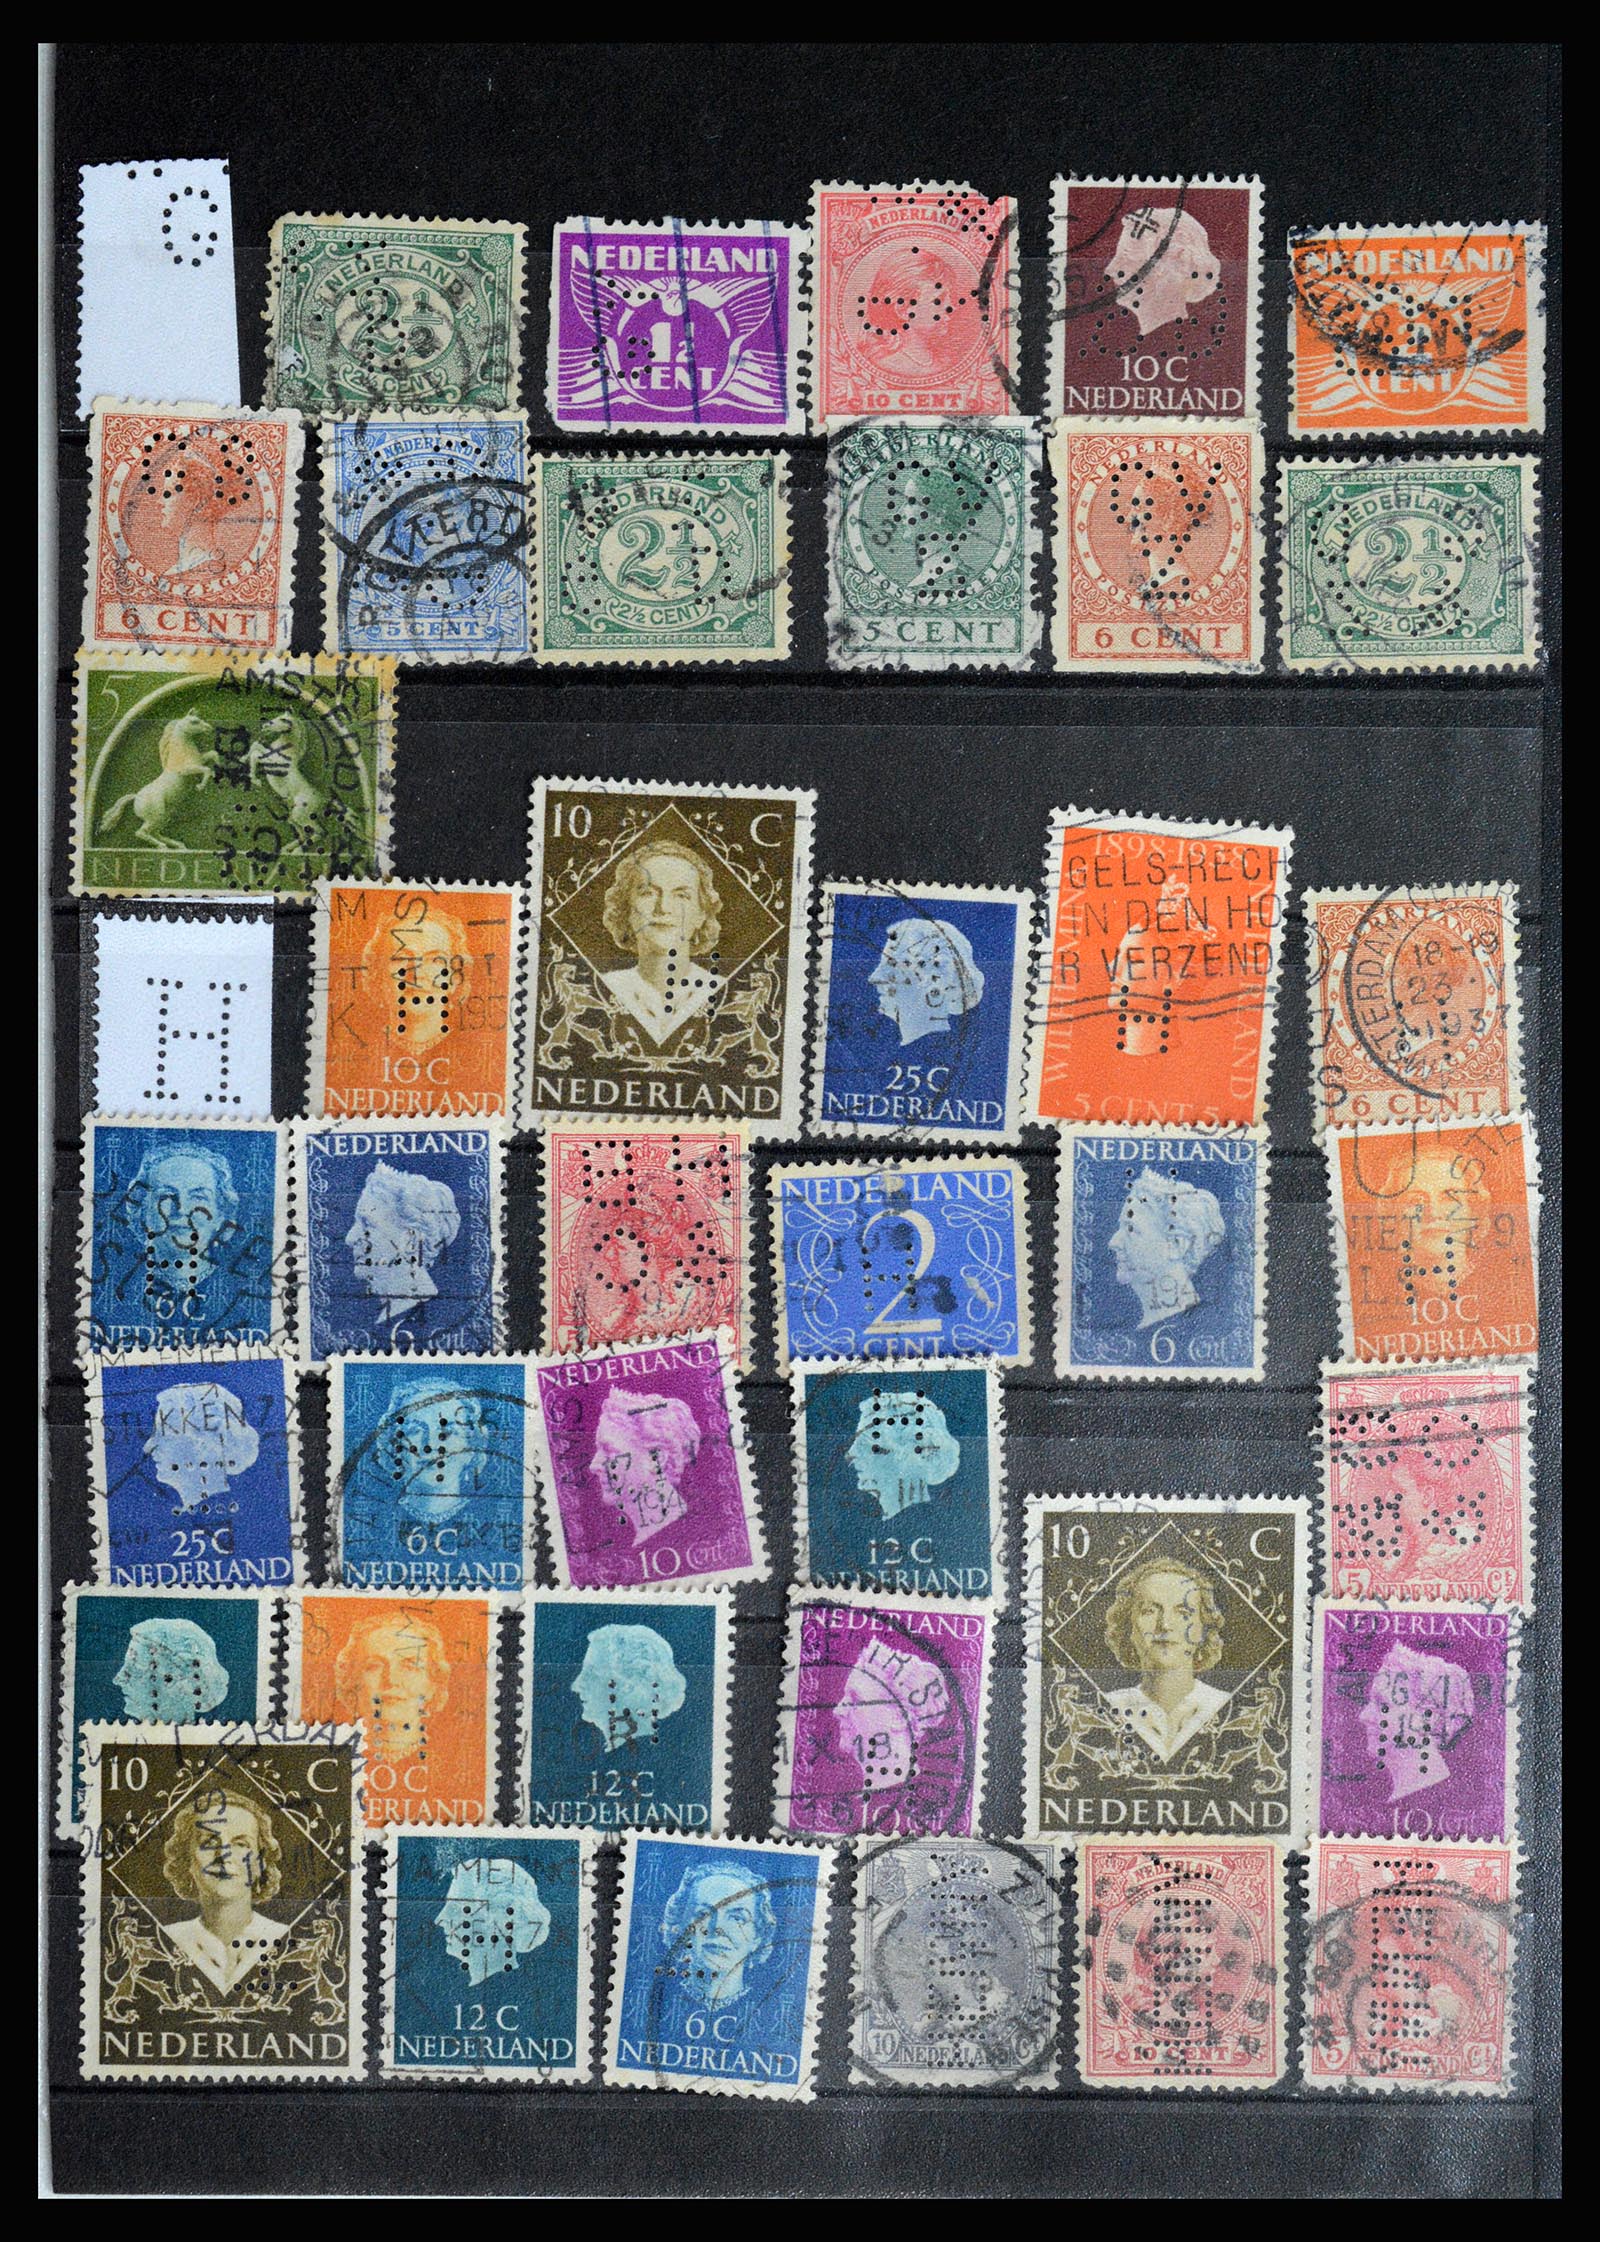 36849 006 - Stamp collection 36849 Netherlands perfins 1891-1960.